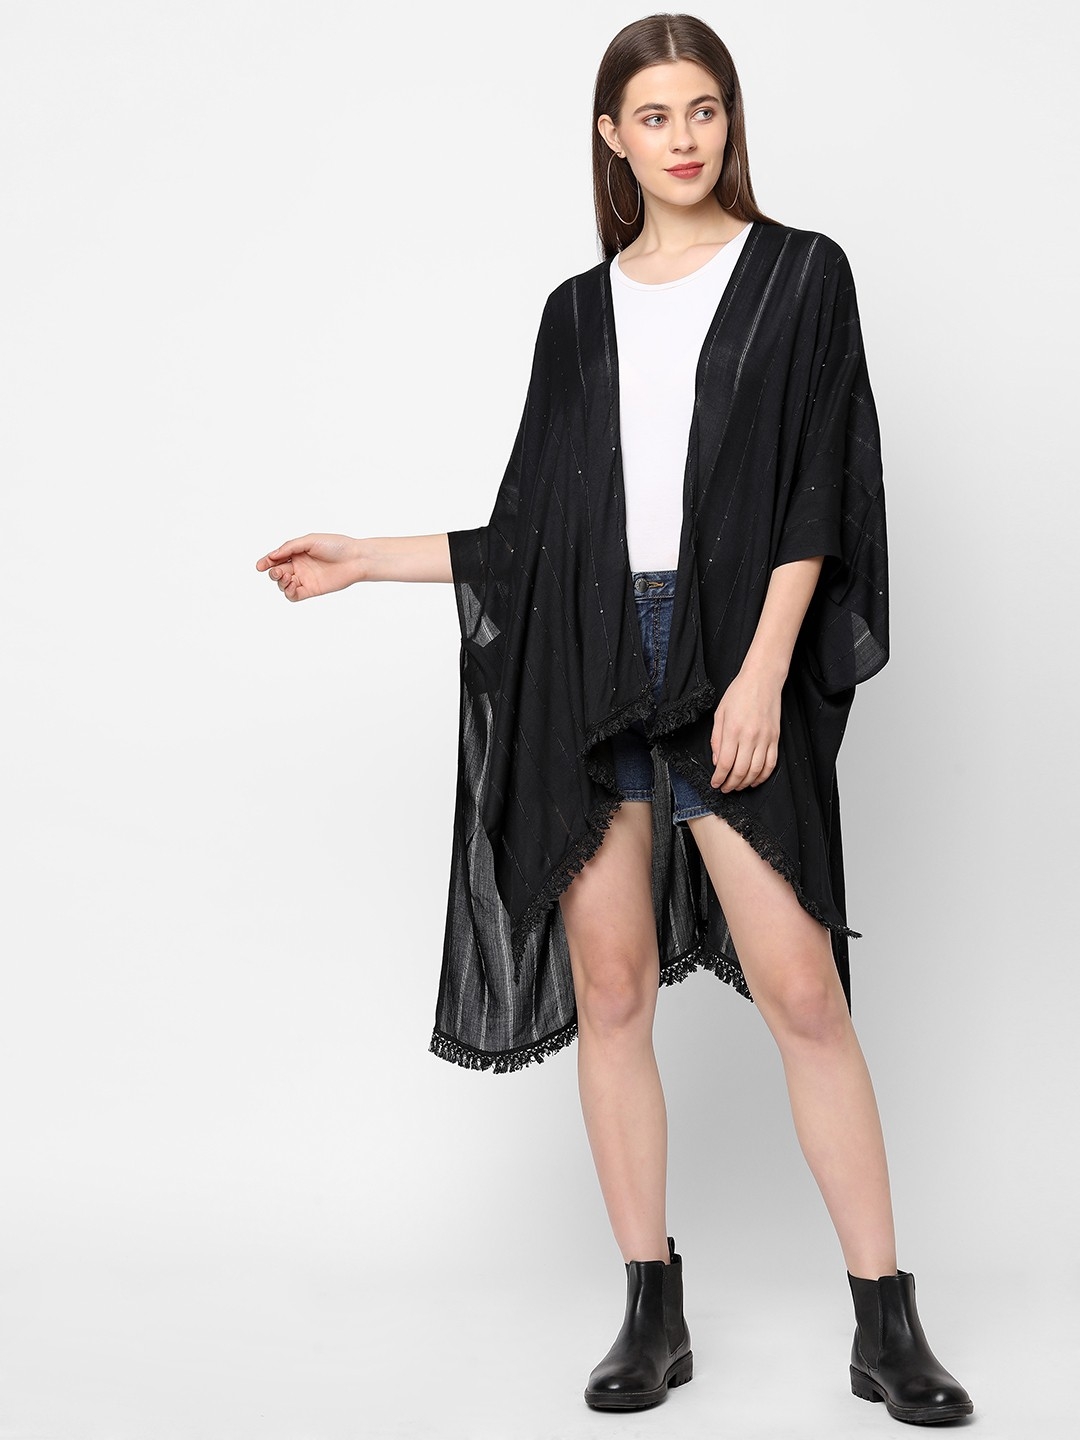 Get Wrapped | Get Wrapped Sequins Kimonos with lace for Women